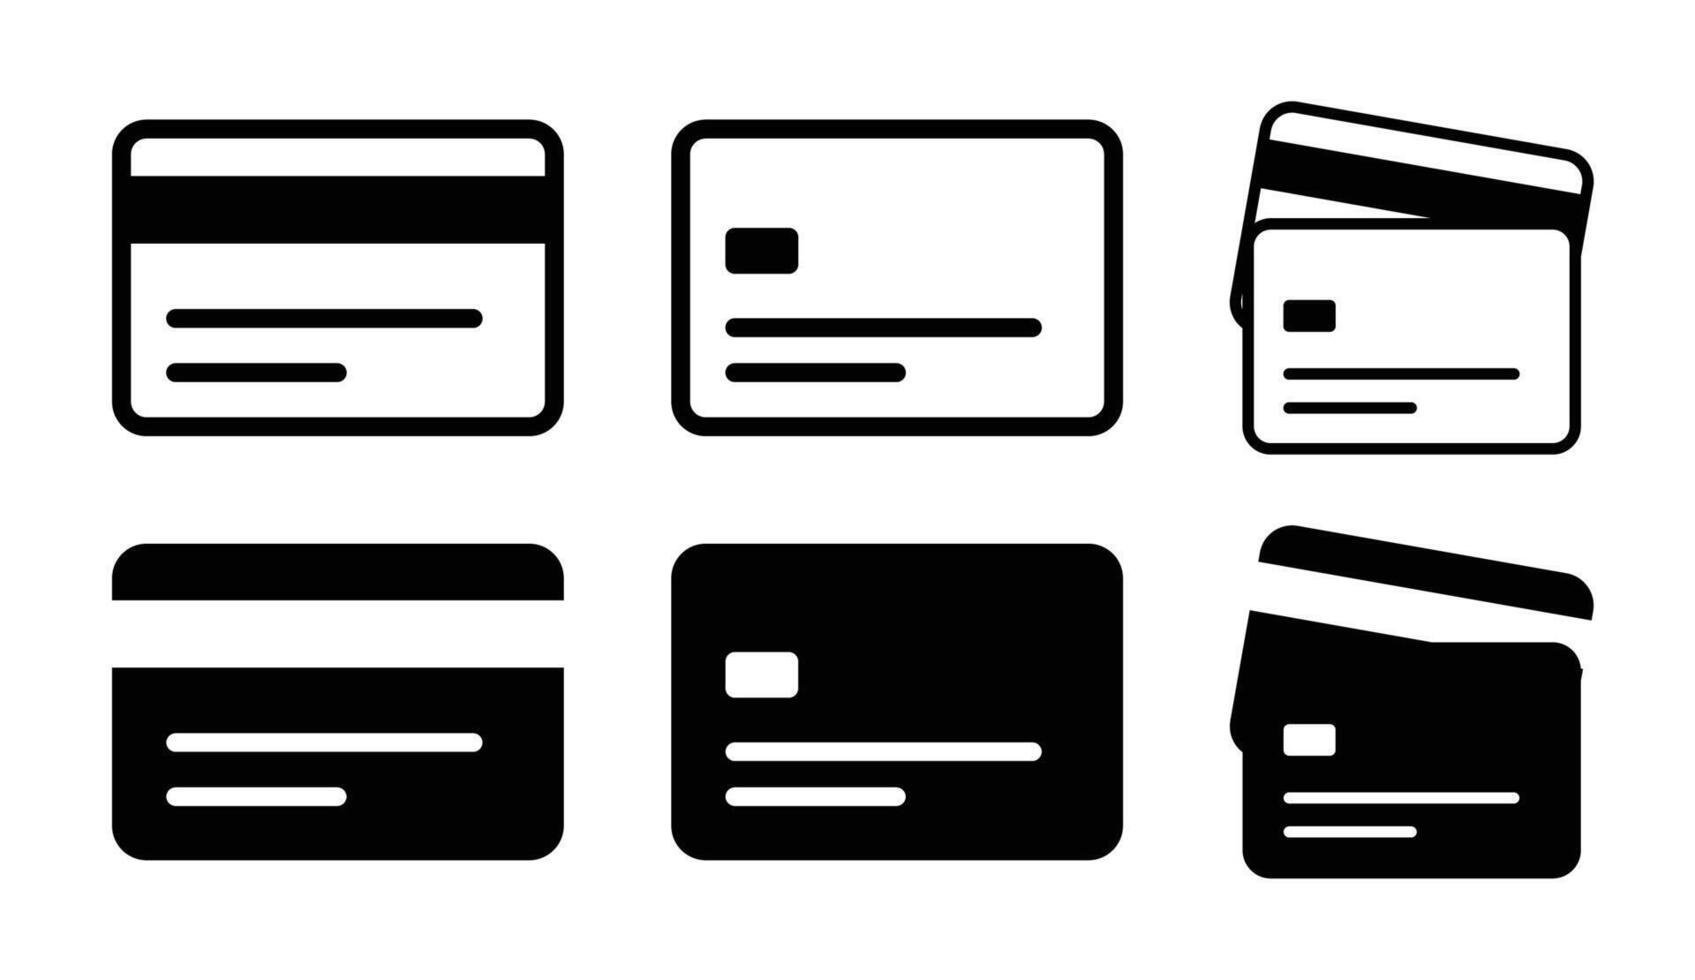 Credit card or debit card card icon set of font and back sites vector